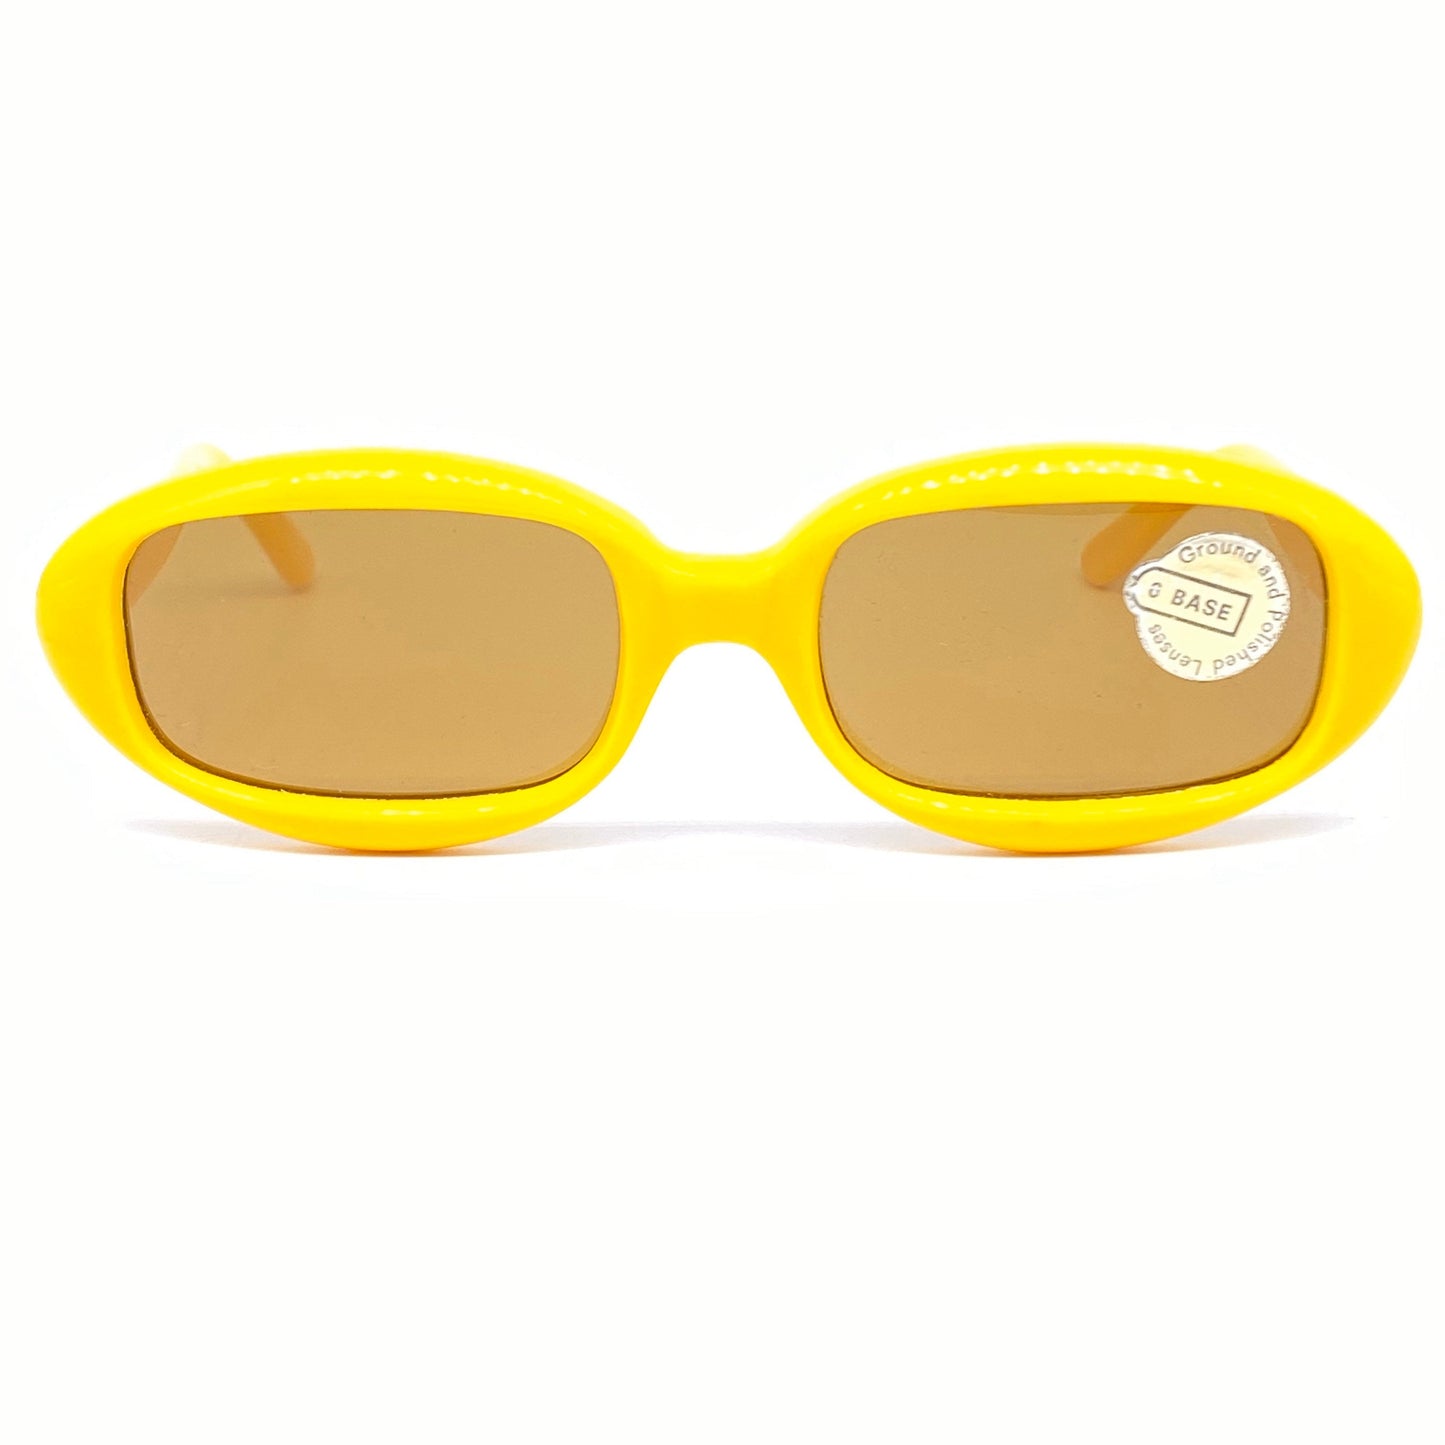 1960s NOS colorful Mod oval sunglasses with square lenses cut, coming in pink or yellow